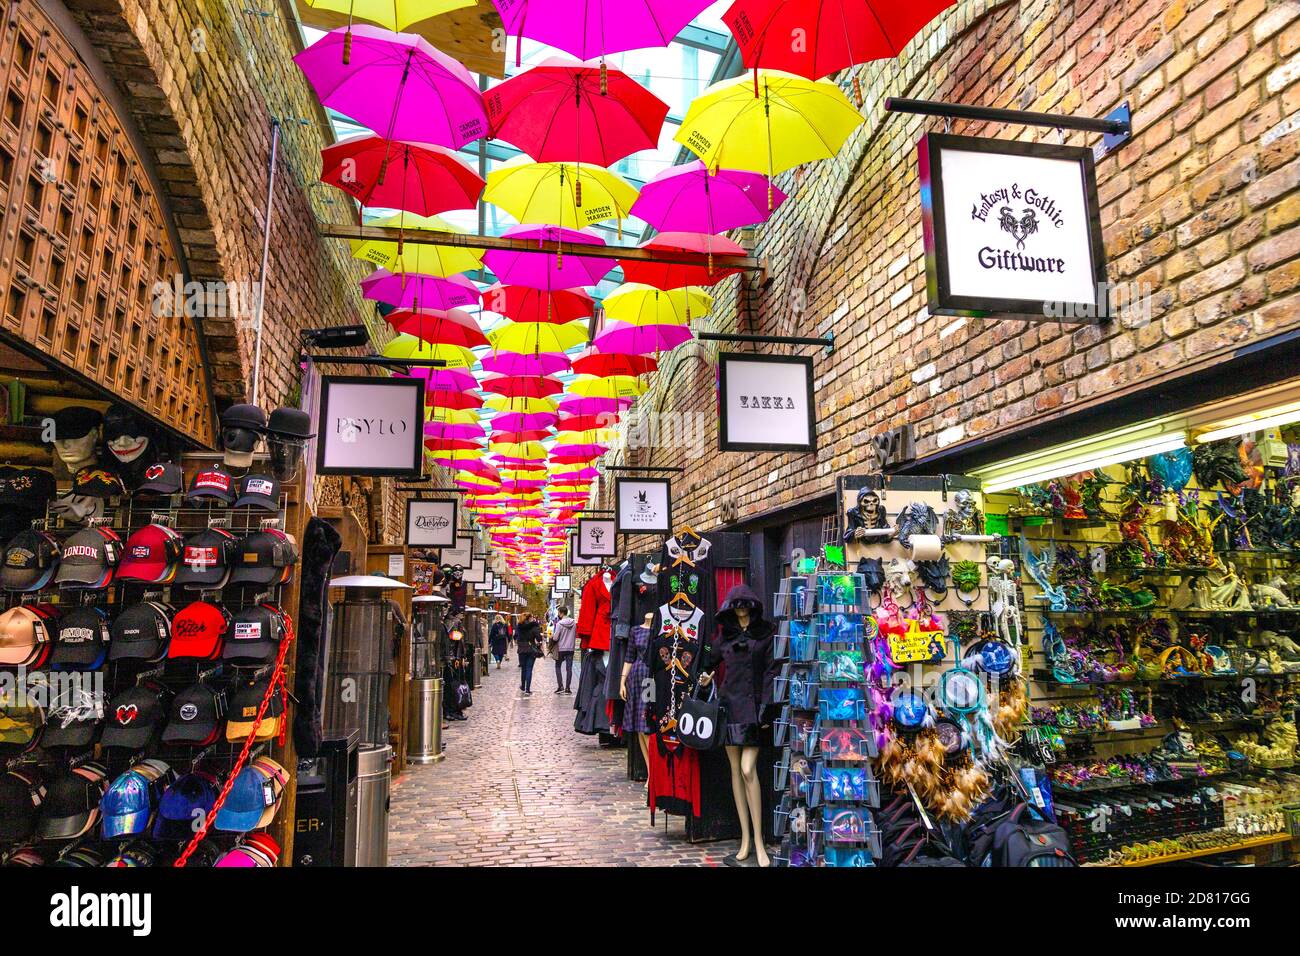 Alley covered with umbrellas at Camden Market, London, UK Stock Photo